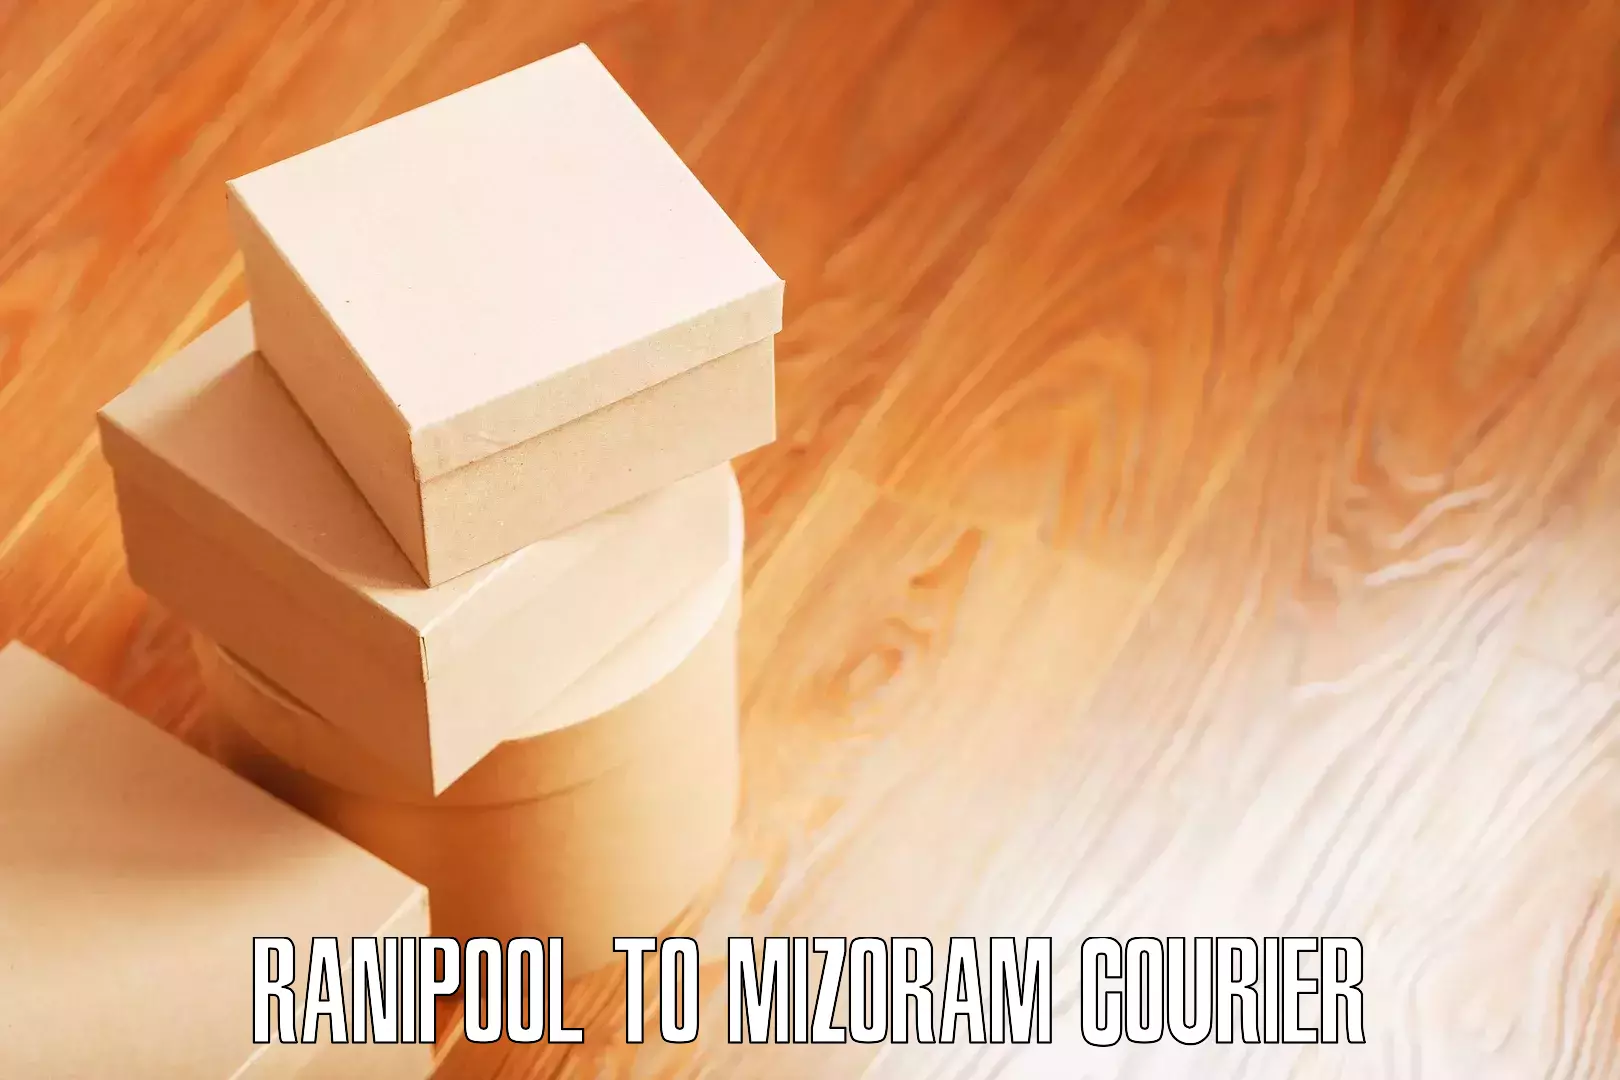 Safe moving services in Ranipool to Mizoram